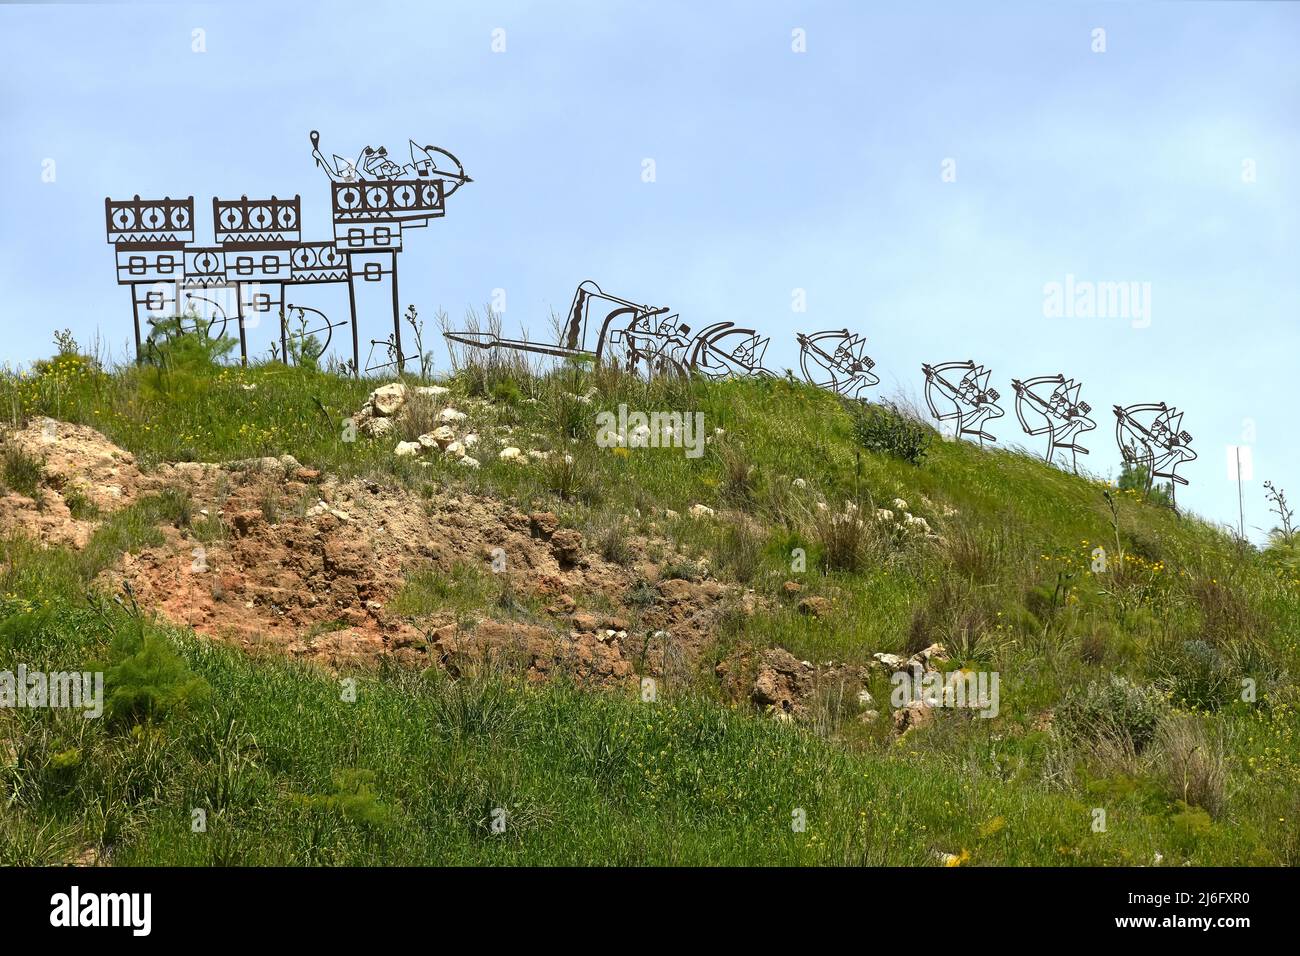 Tel lachish. Ancient site in Israel Stock Photo